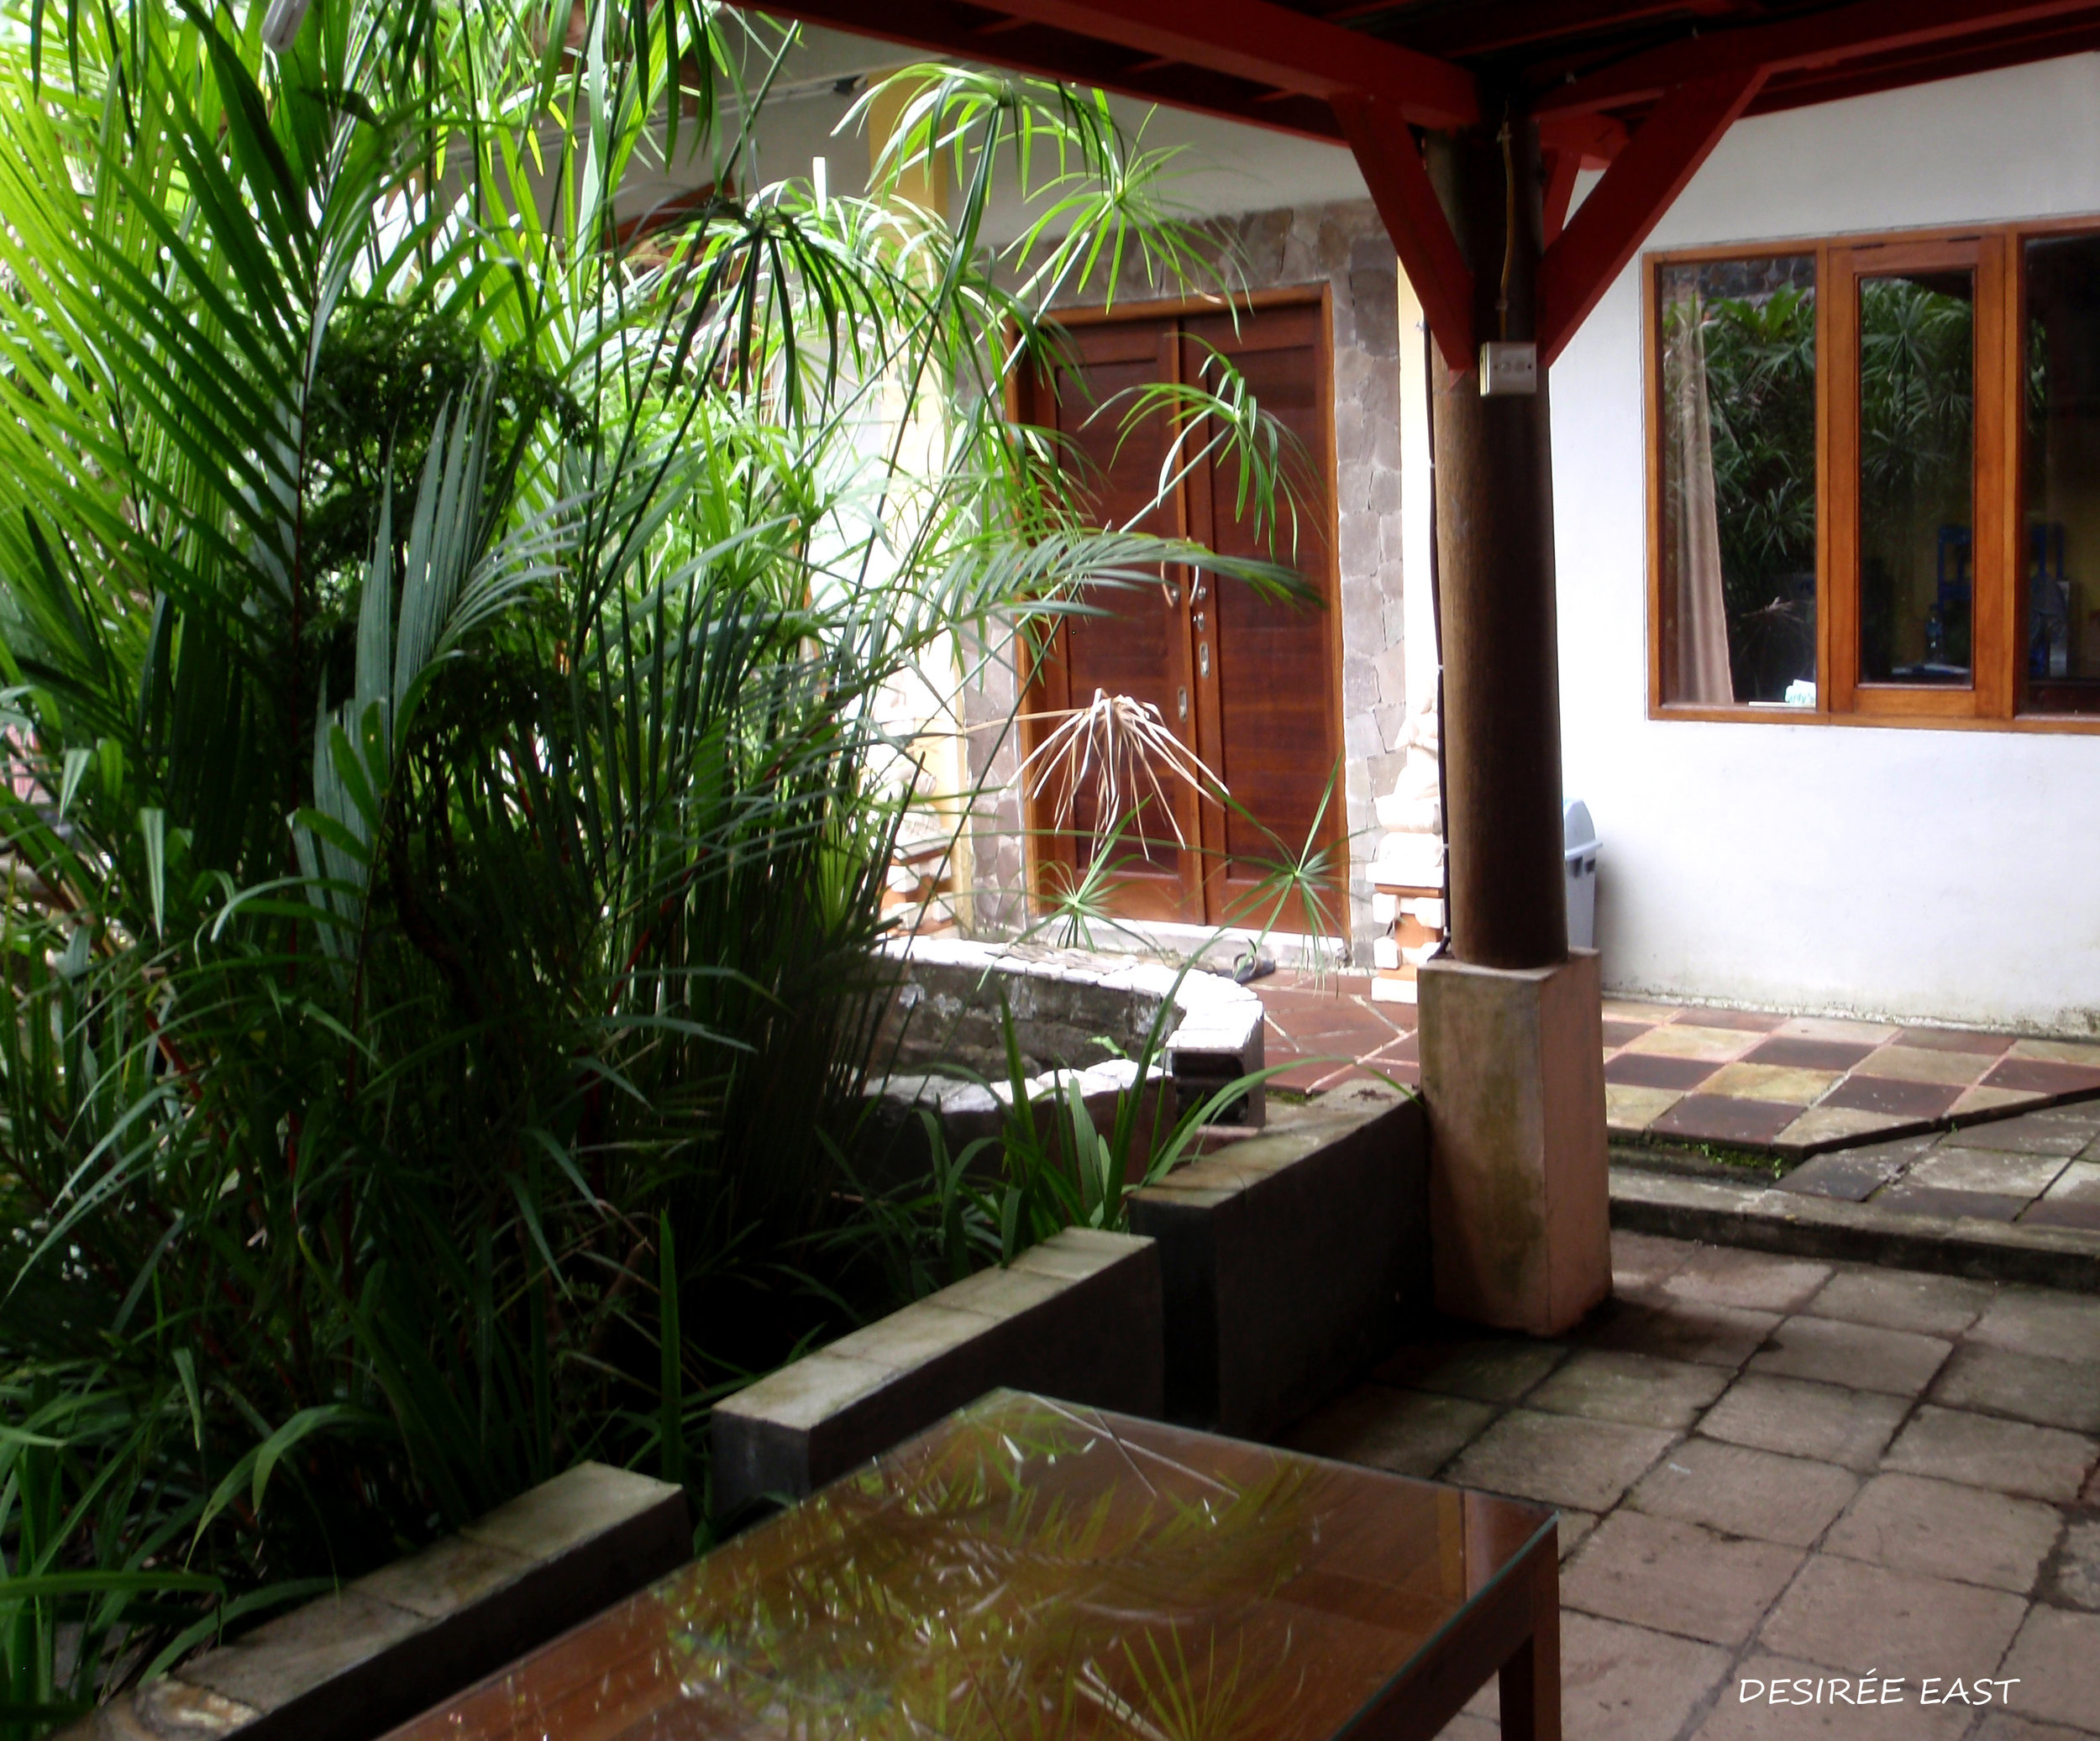 our front door. andree homestay. bali, indonesia. photo by desiree east